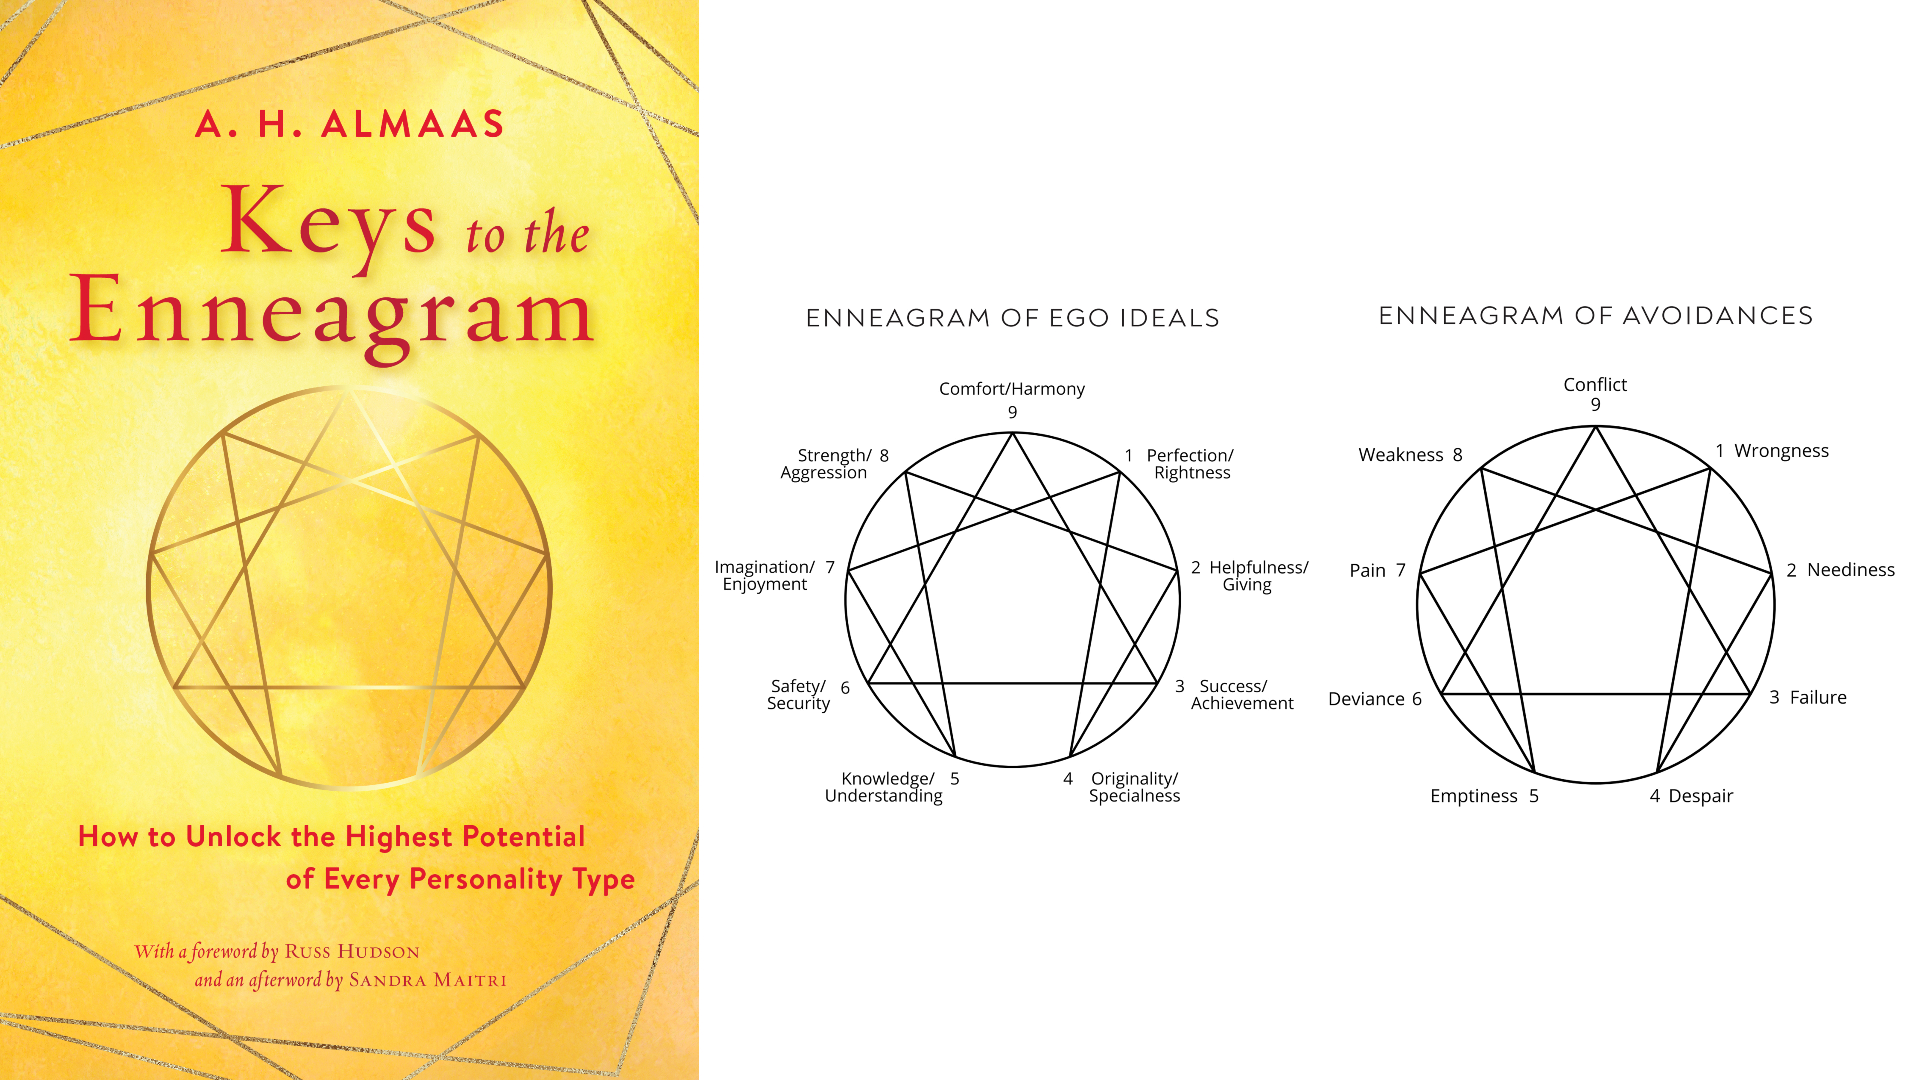 discovering-the-keys-to-the-enneagram-diamond-approach-online